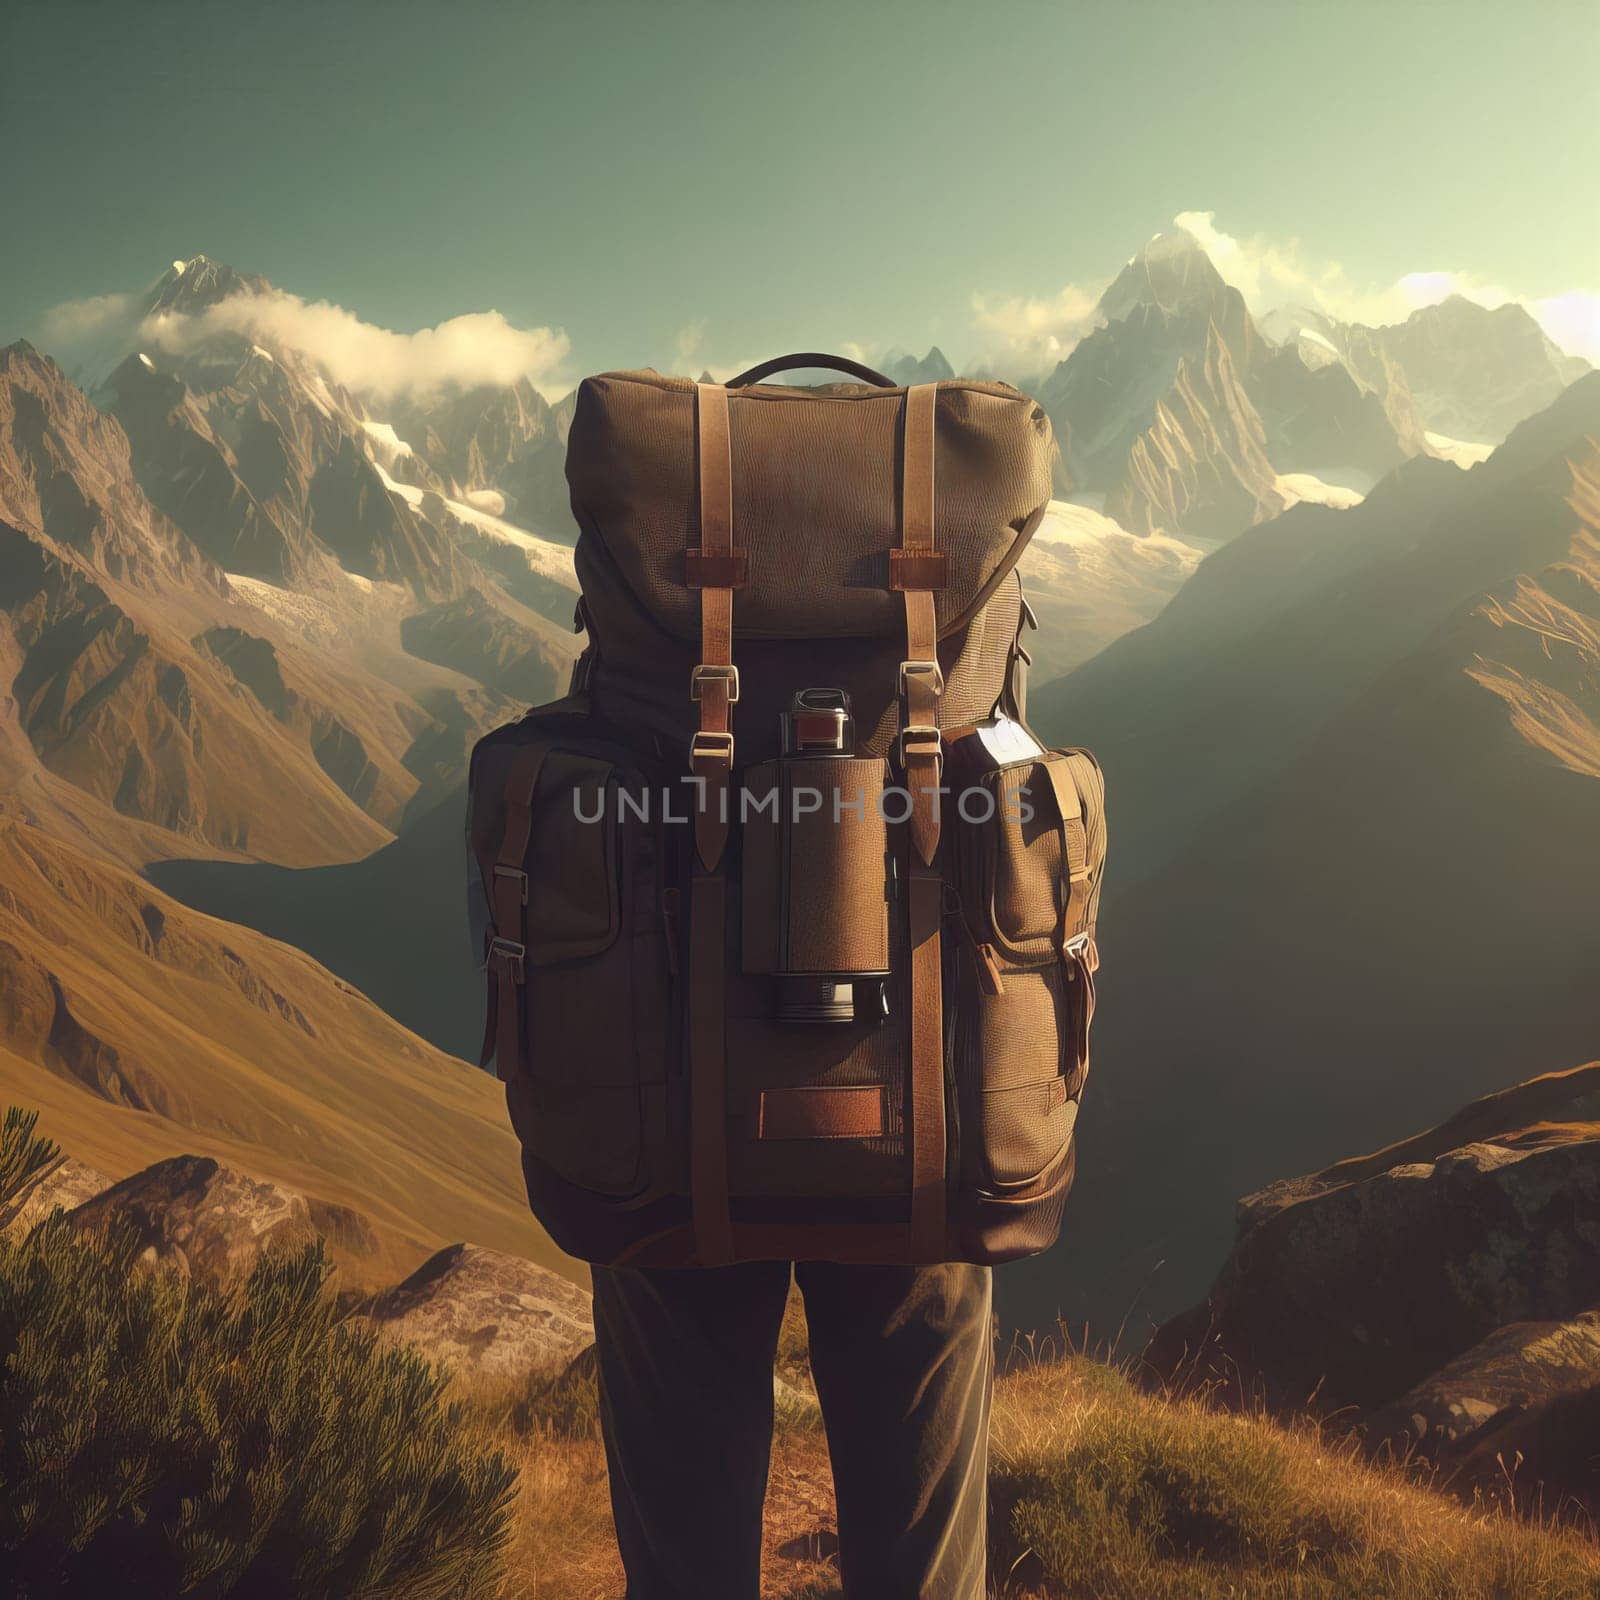 A backpacker stands on a mountain ridge, taking in the breathtaking view of the surrounding mountains